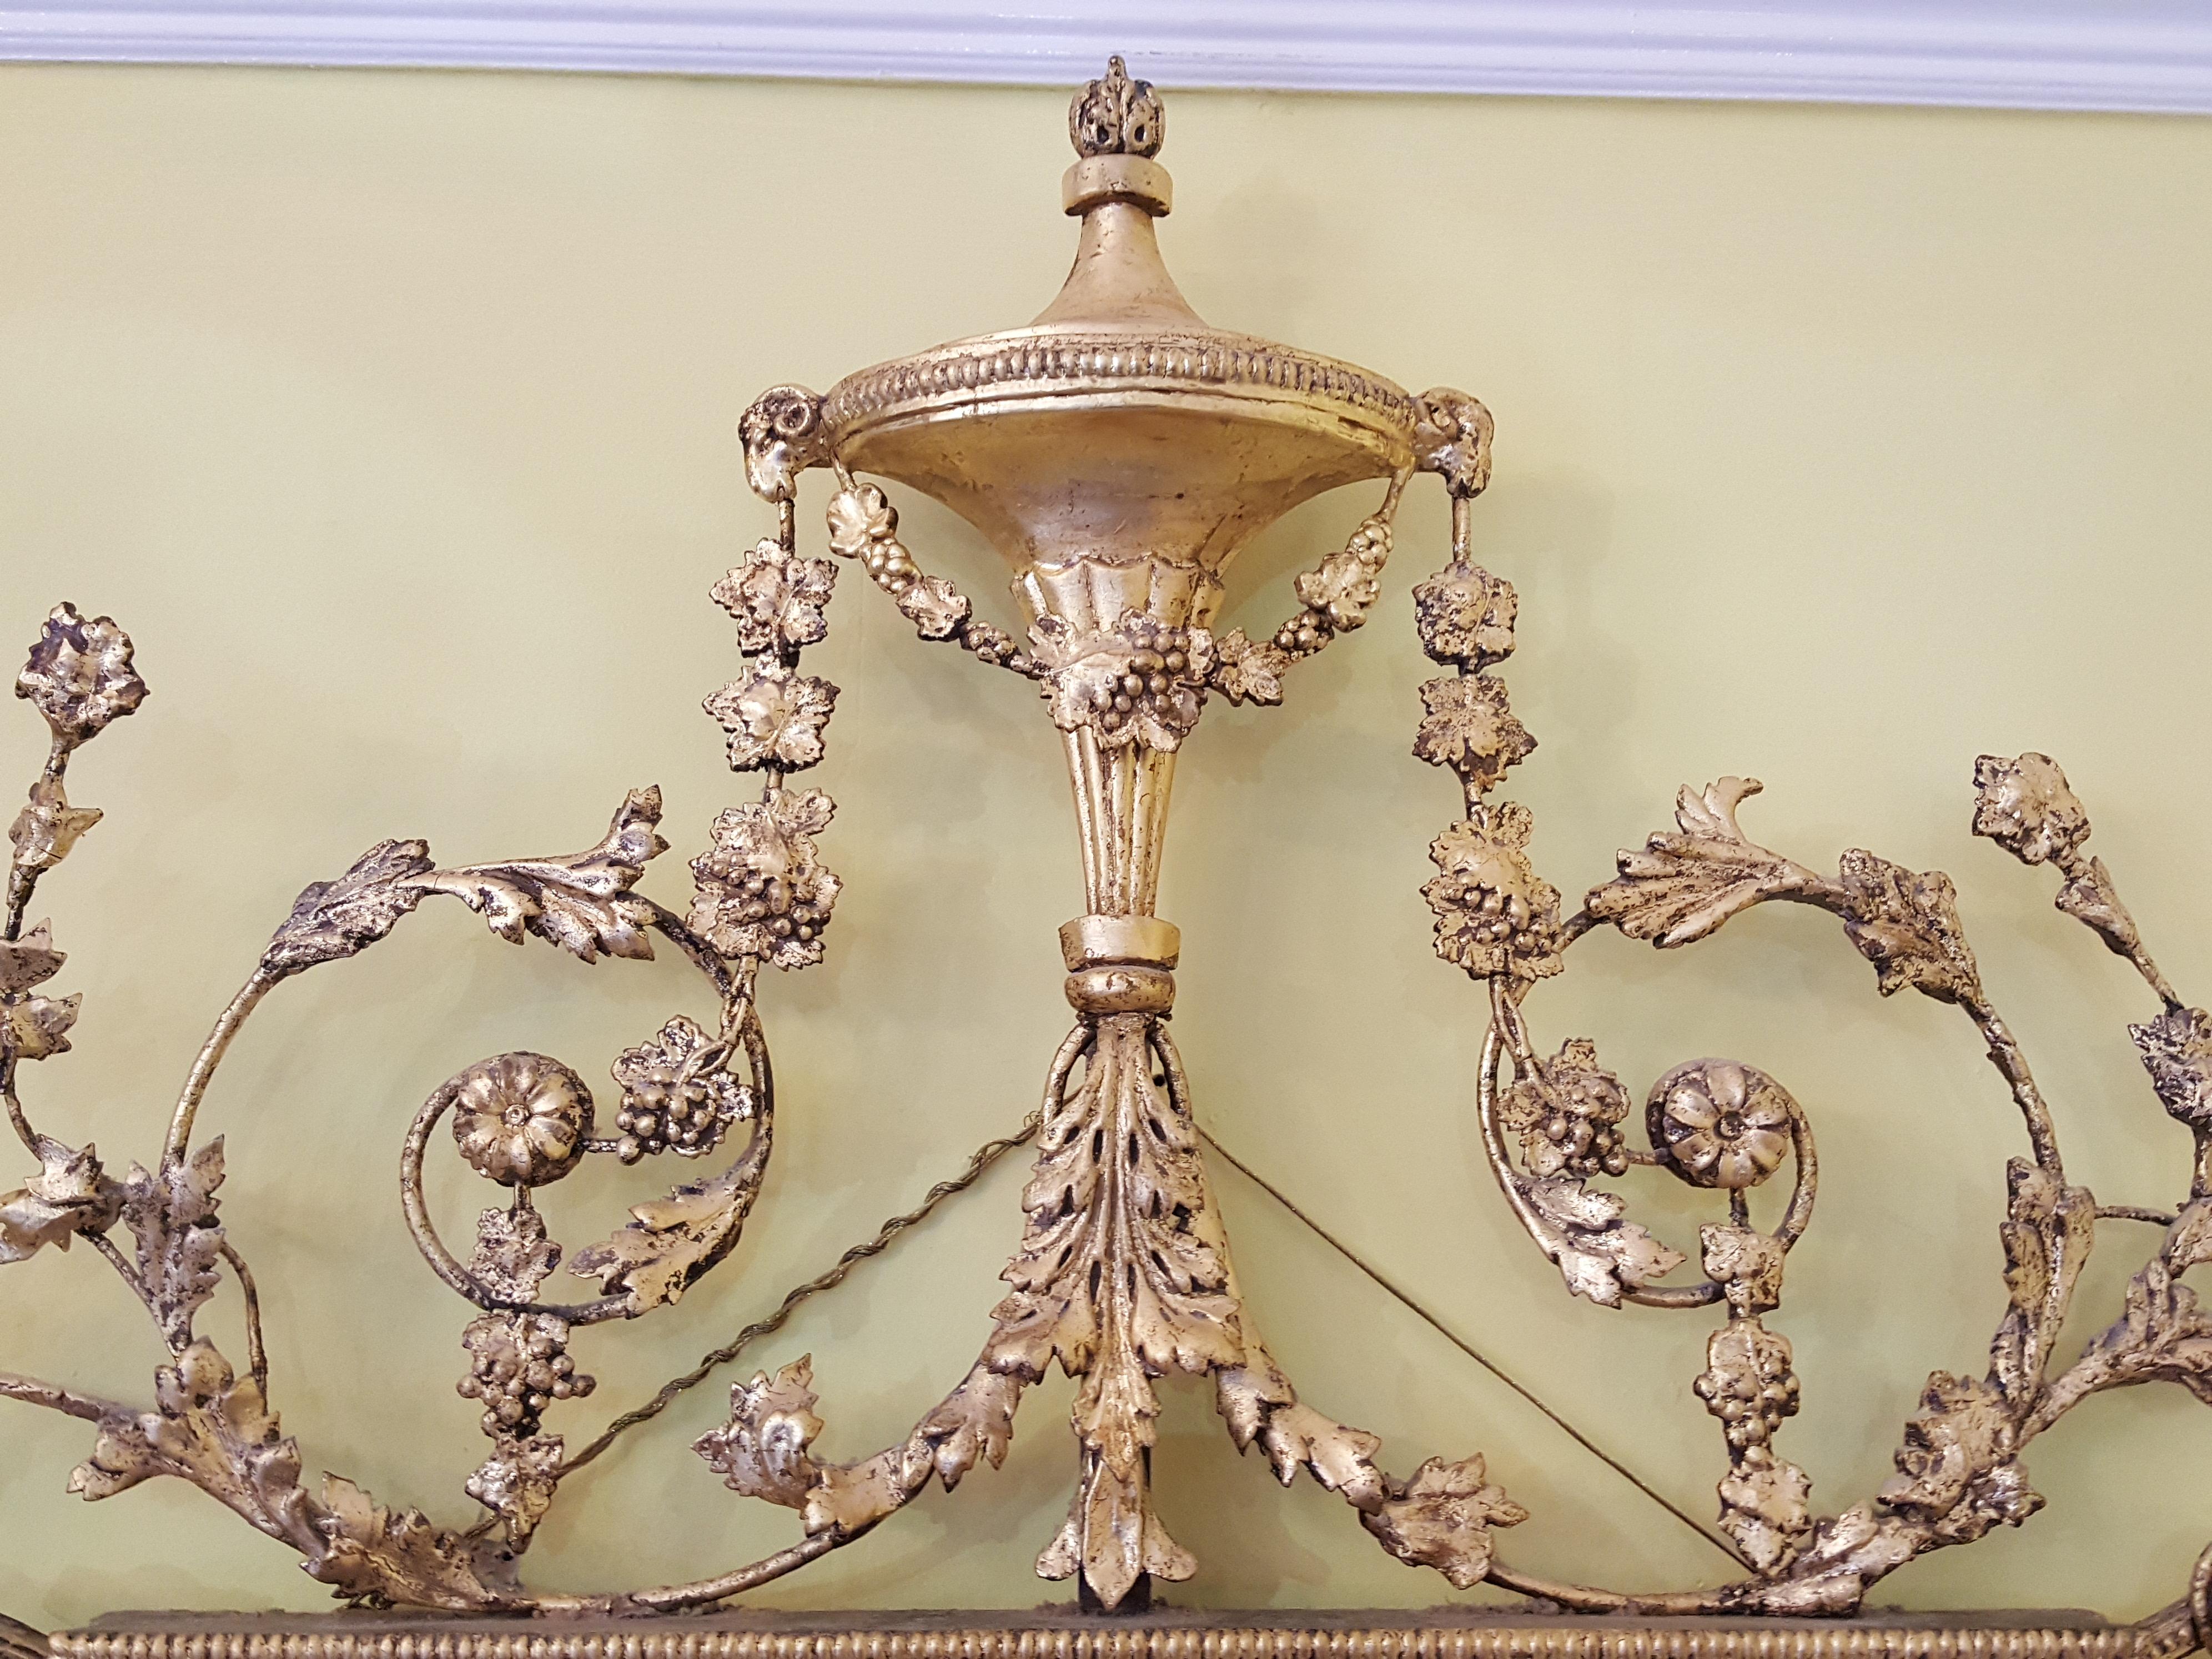 Regency giltwood mirror with swags and urn finial and floral pediment decoration.
Measures: 32